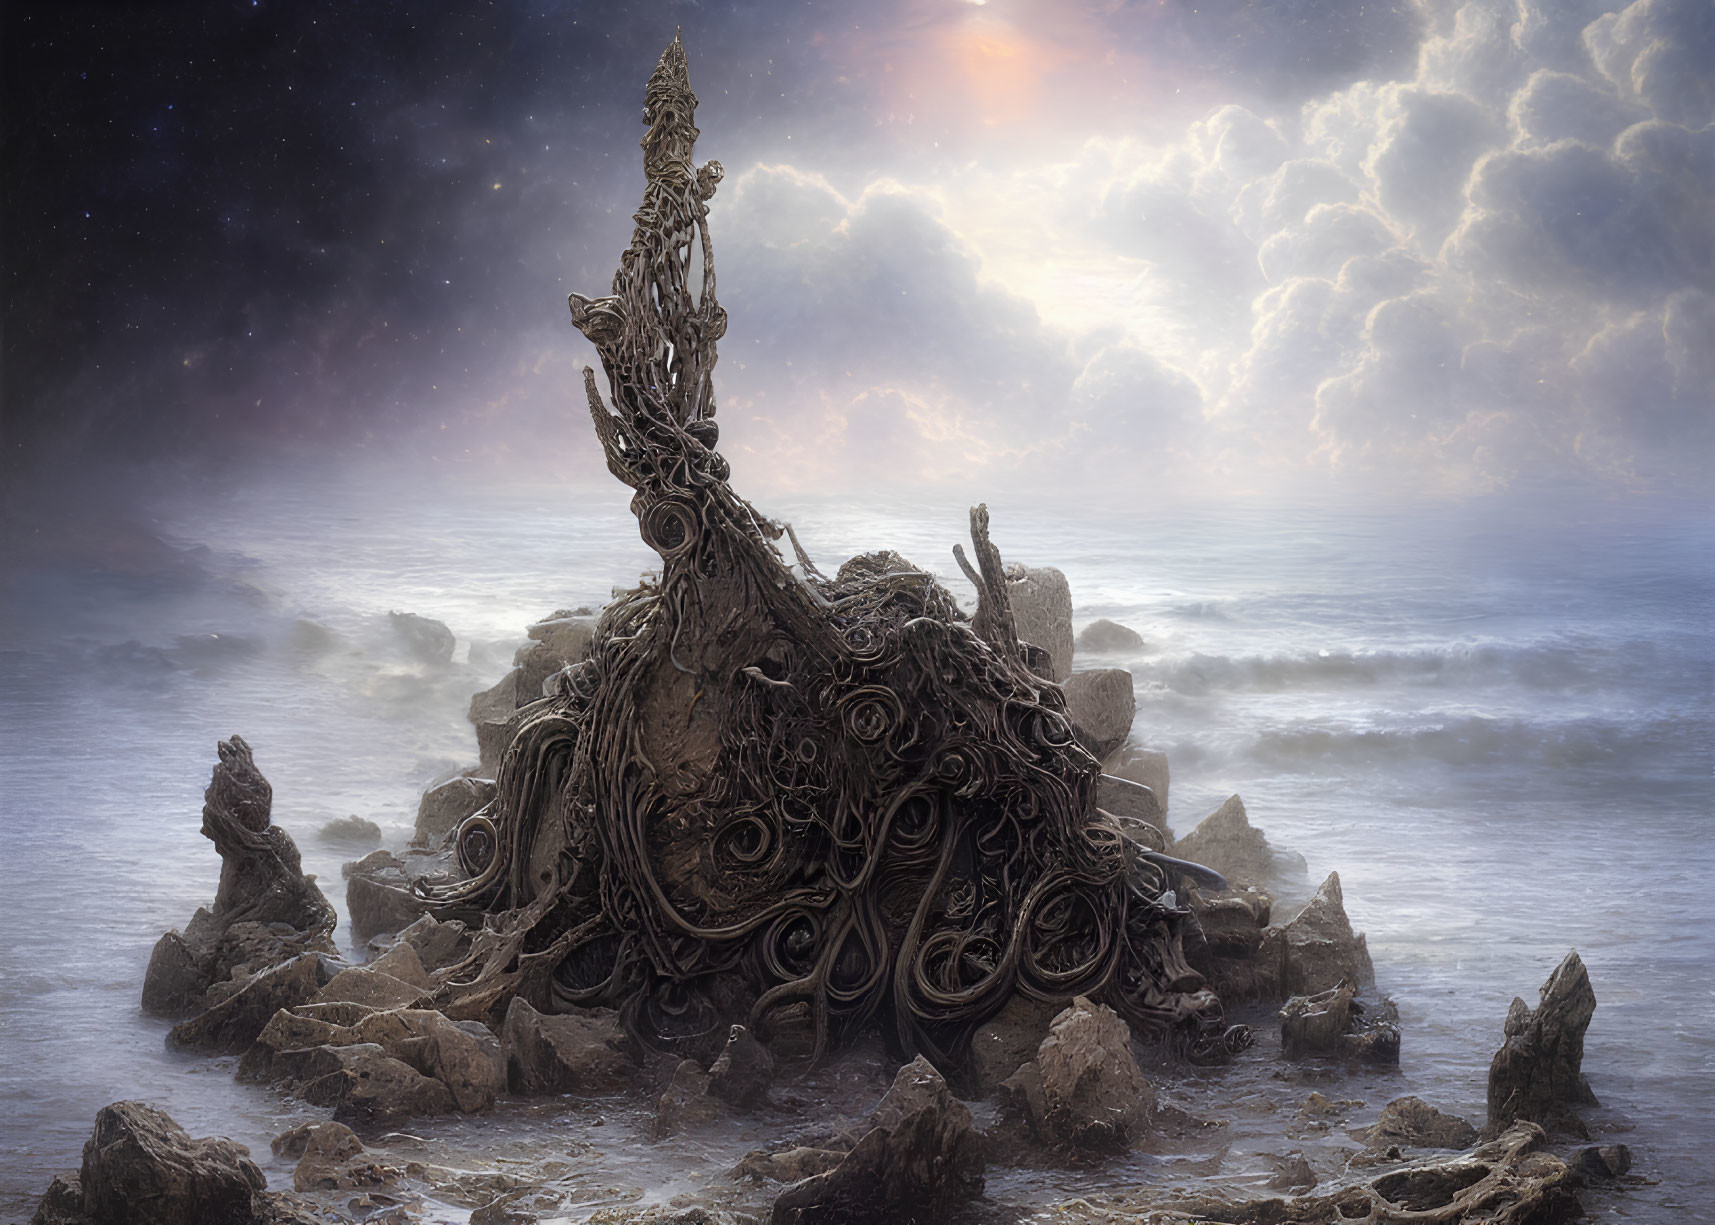 Fantasy-style ornate structure on rocky shore with ocean backdrop